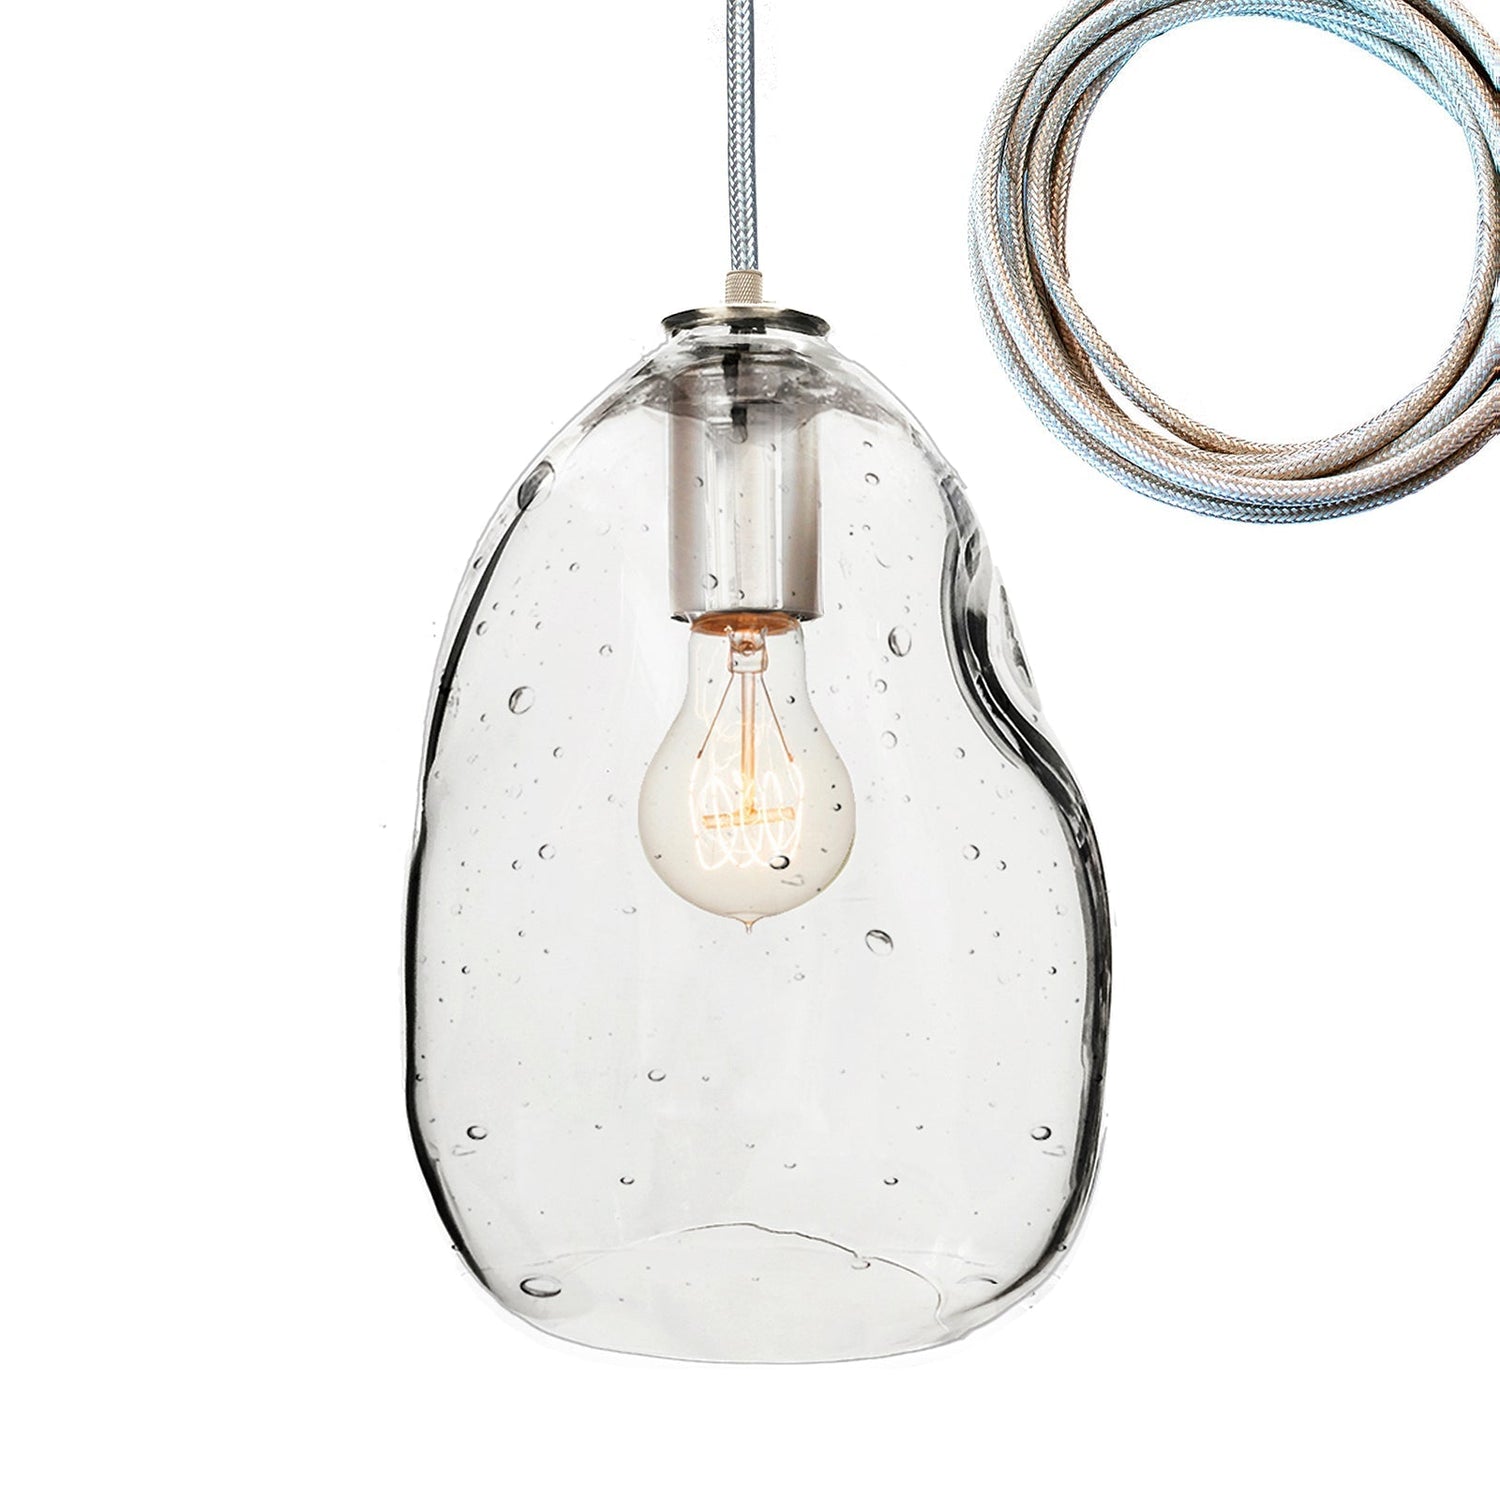 Seedy Bubble Hand Blown Glass and Stagger 5 Light Chandelier